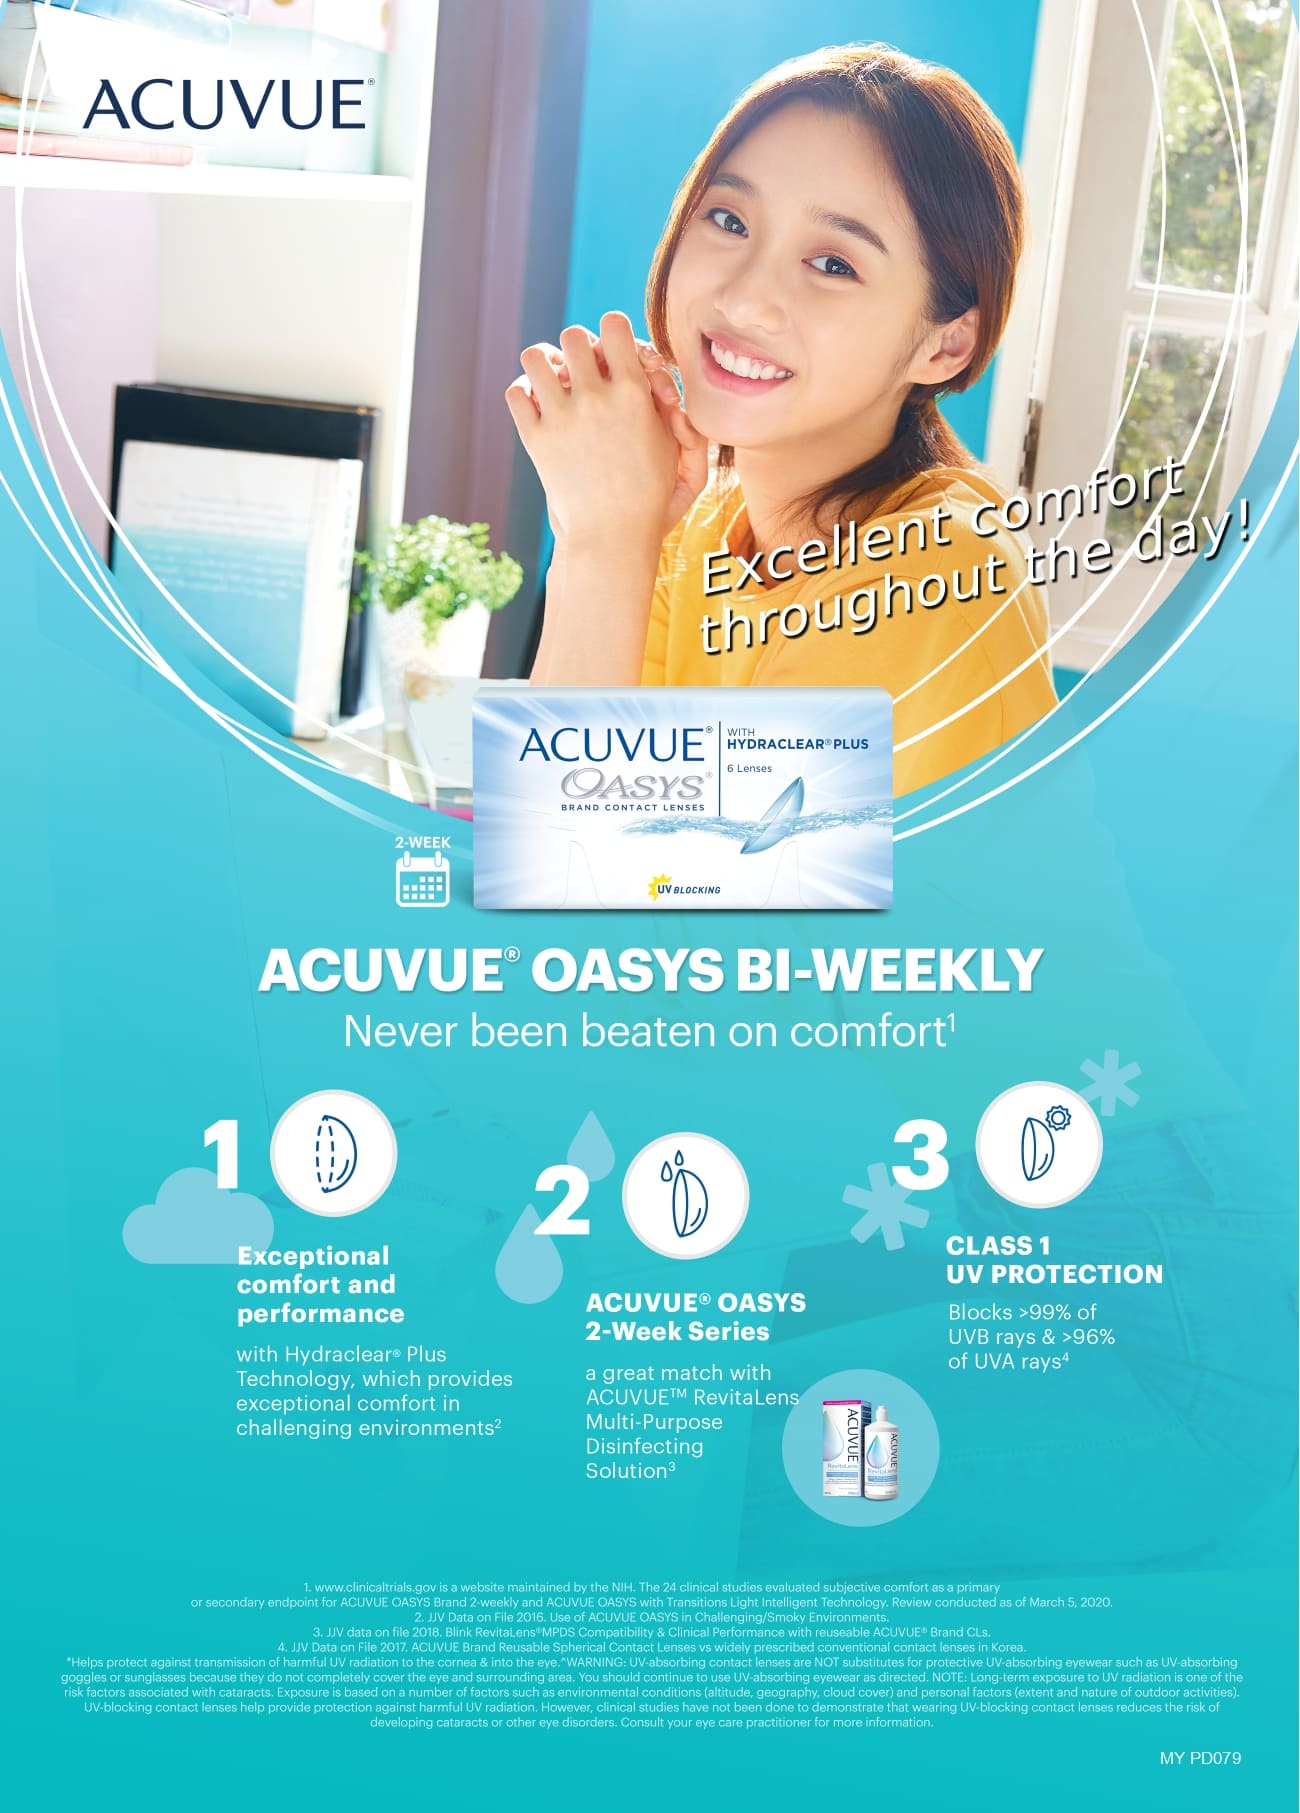 acuvue-oasys-biweekly-product-infor-1-acuvue-brand-contact-lenses